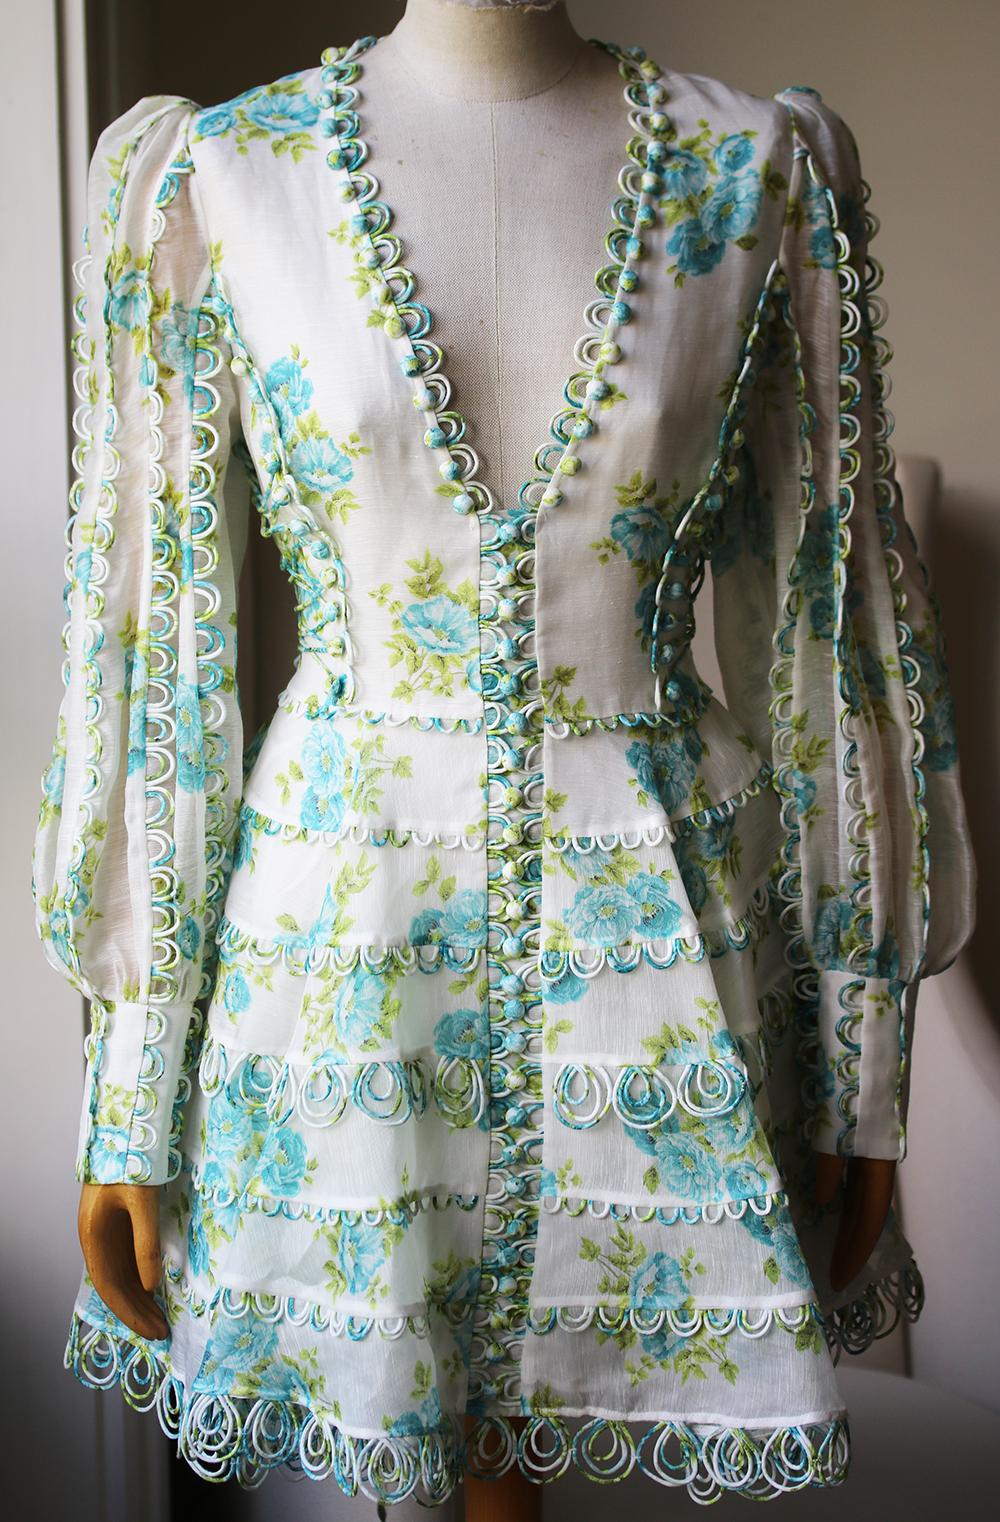 Crisp, slubbed organza. Decorative buttons and loops. Floral print. Mini dress cut. V neck. Long sleeves. Zip at back. Lined. Shell: 51% linen, 49% silk.

Size: 3 (UK 14, US 10, FR 42, IT 46)

Condition: As new condition, no sign of wear. 